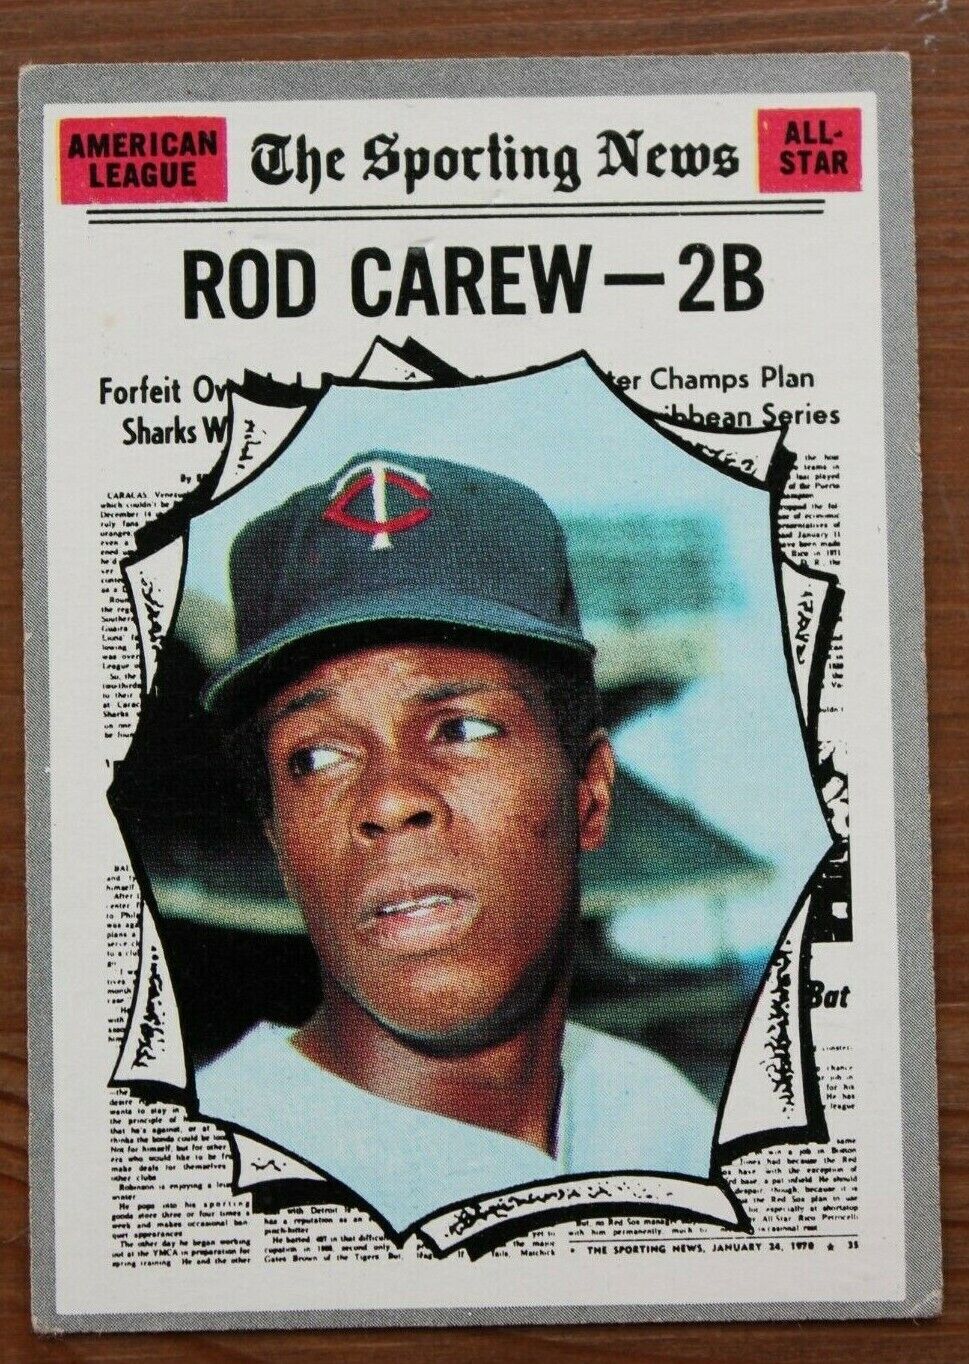 1970 TOPPS #453 ROD CAREW  The Sporting News All-Star